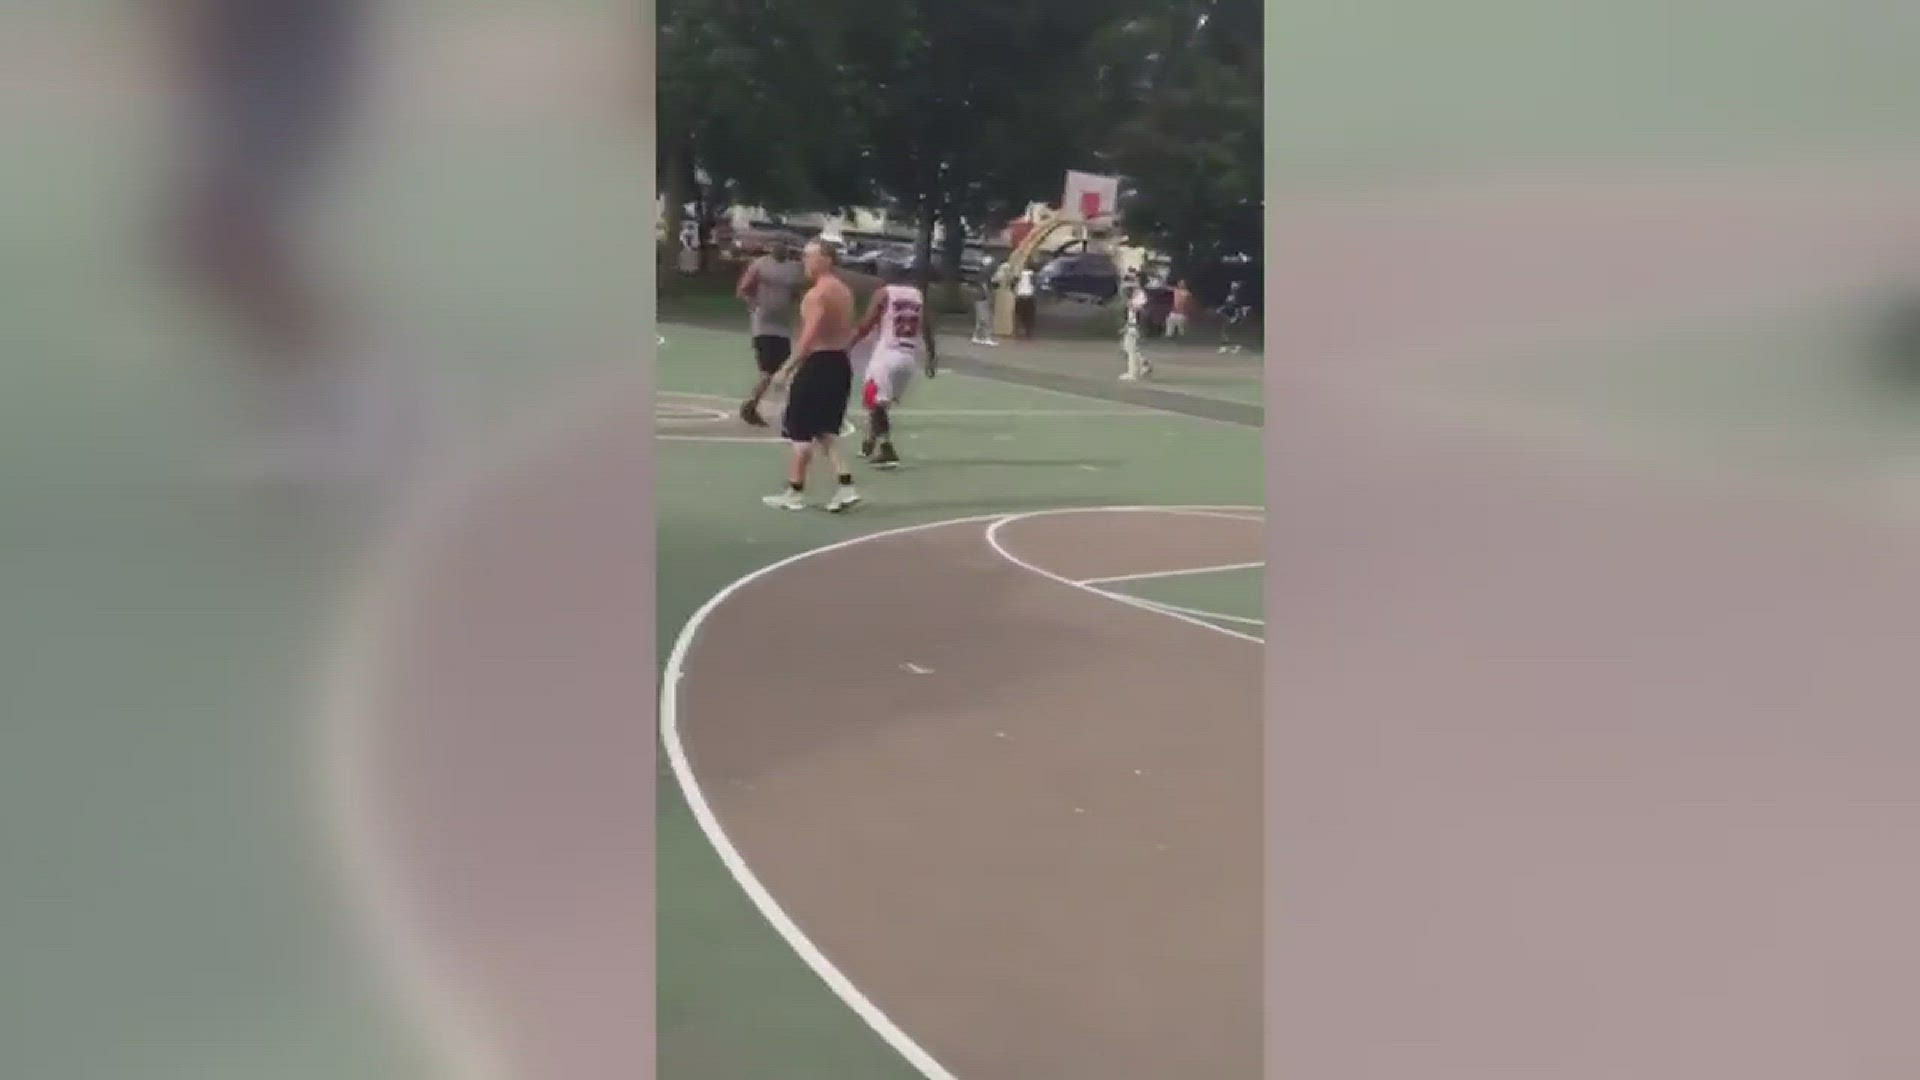 The first glimpse of Jeffrey Harrison, aka "CDAMJ" happened with a twitter video of Harrison playing basketball went viral.